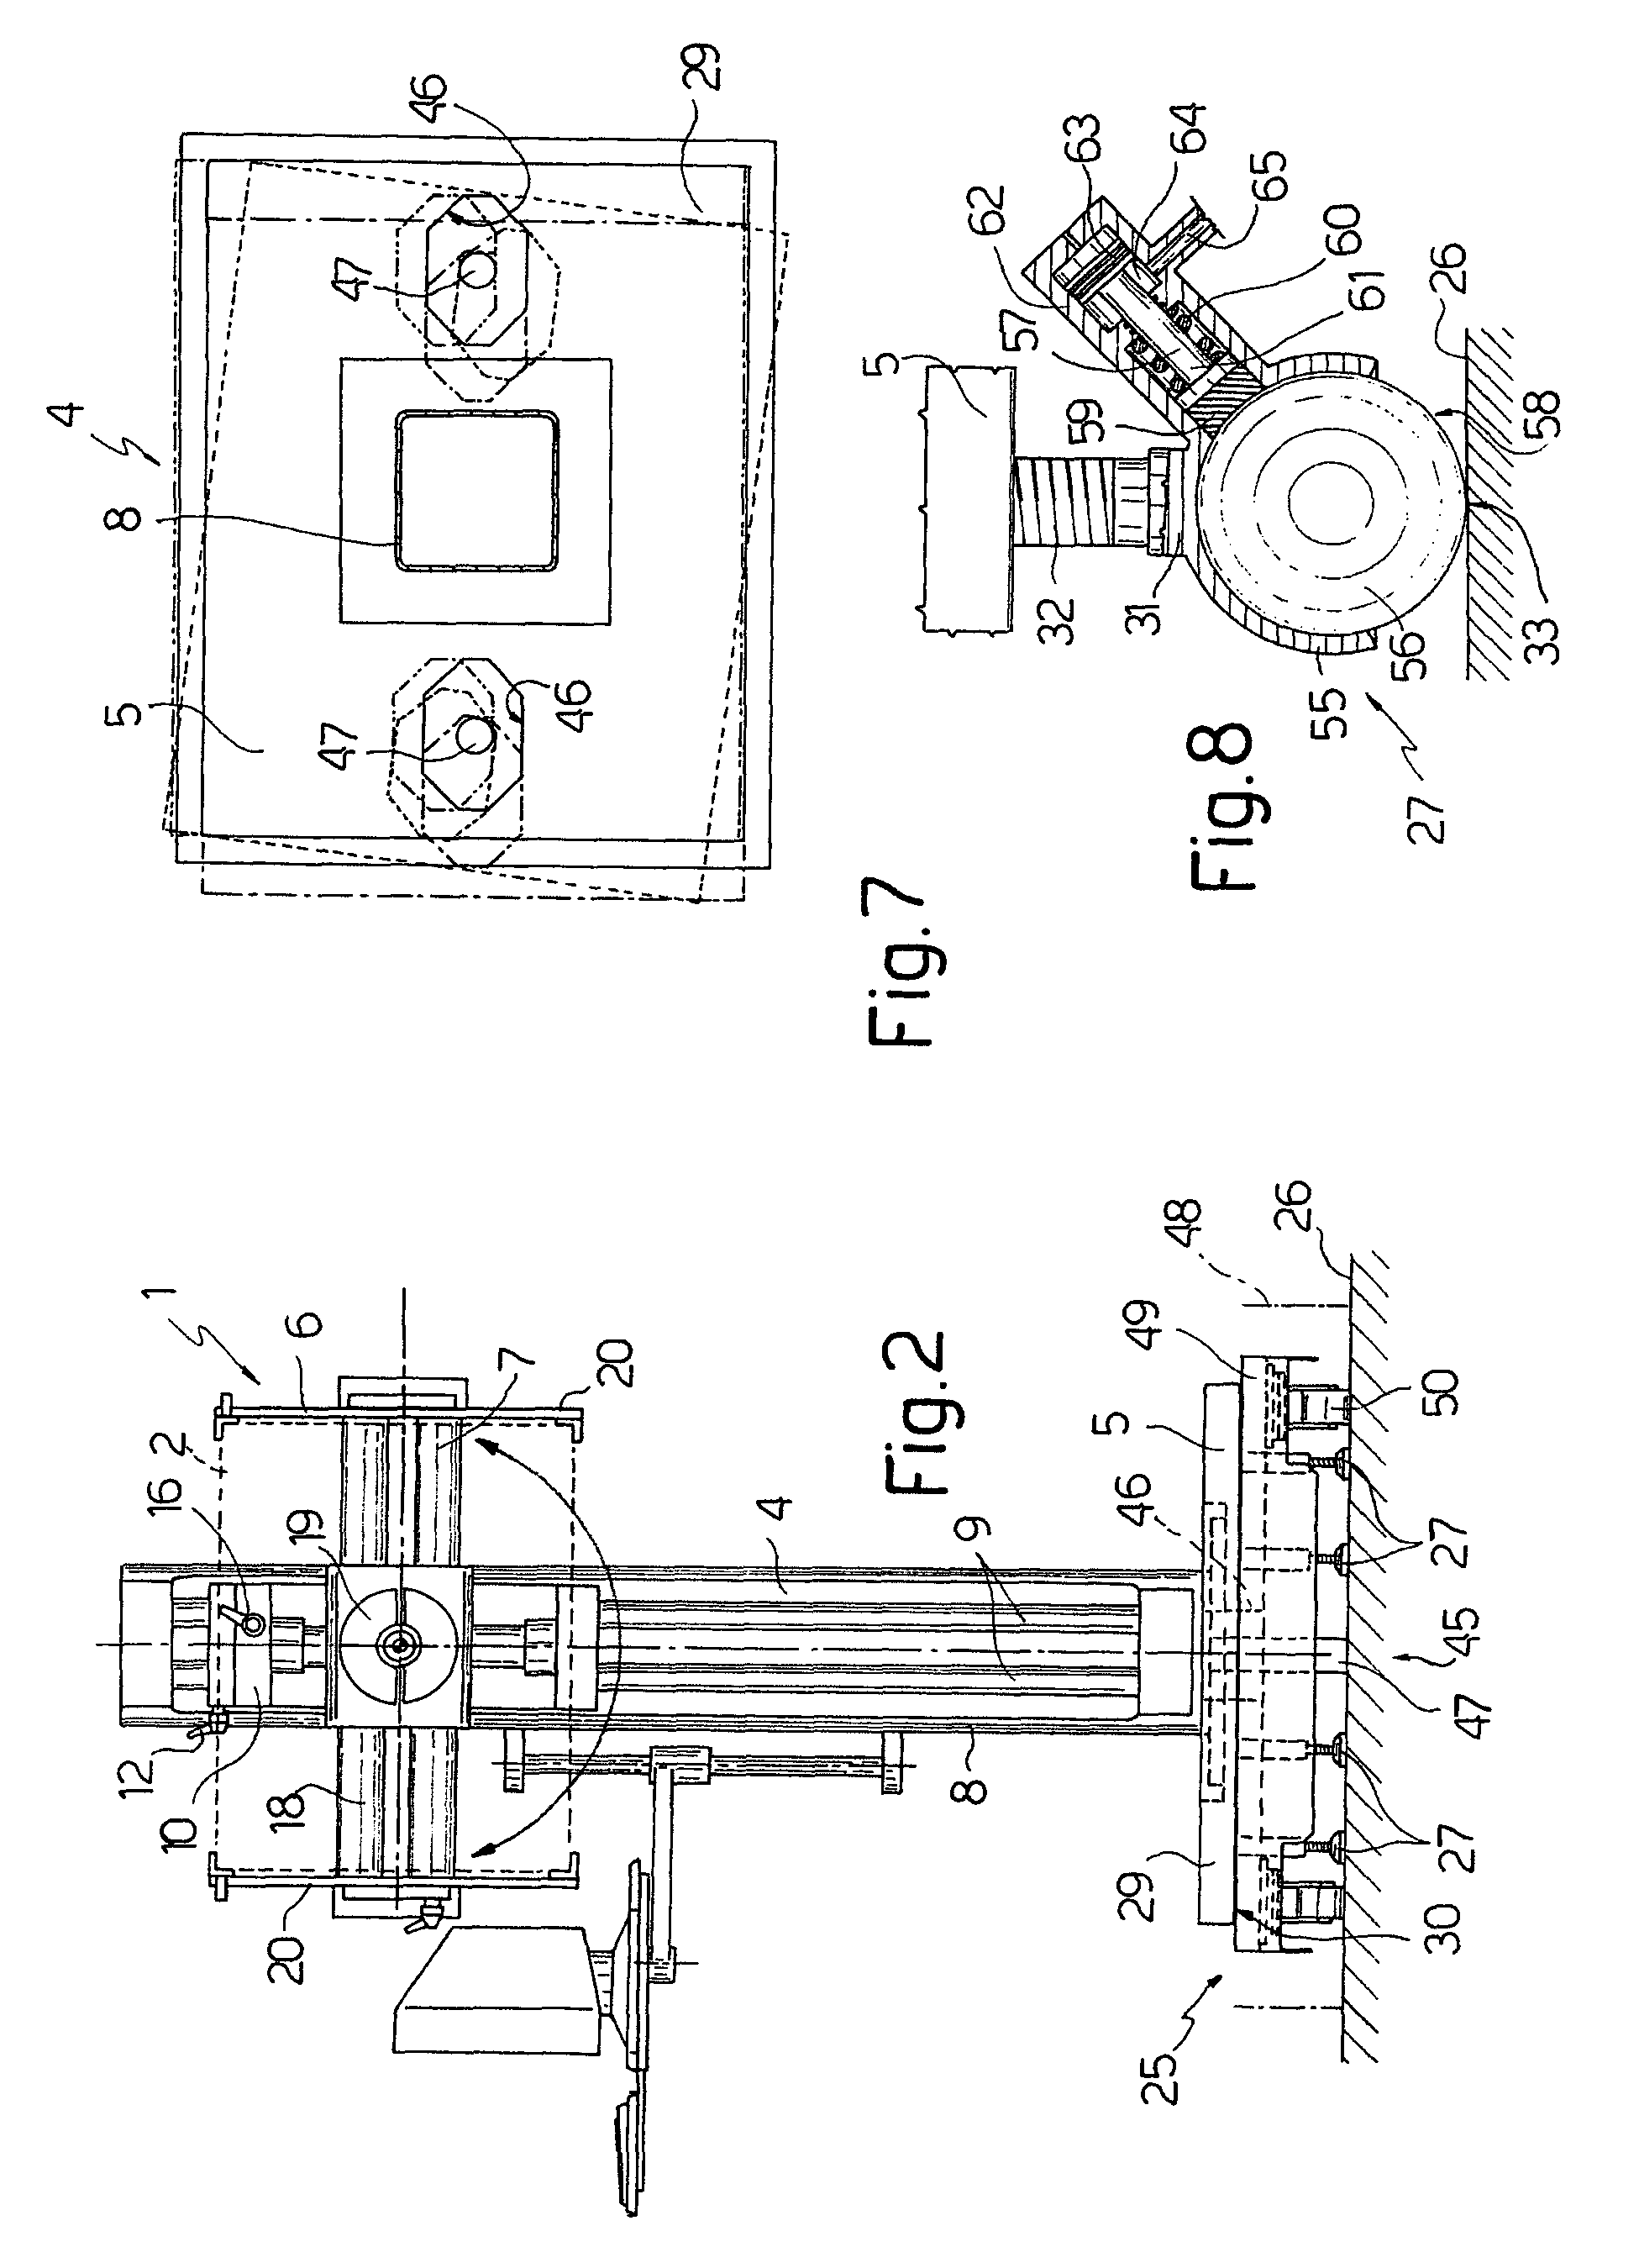 Device for positioning an electronic test head with respect to a manipulator for manipulating electronic components, in particular integrated circuits